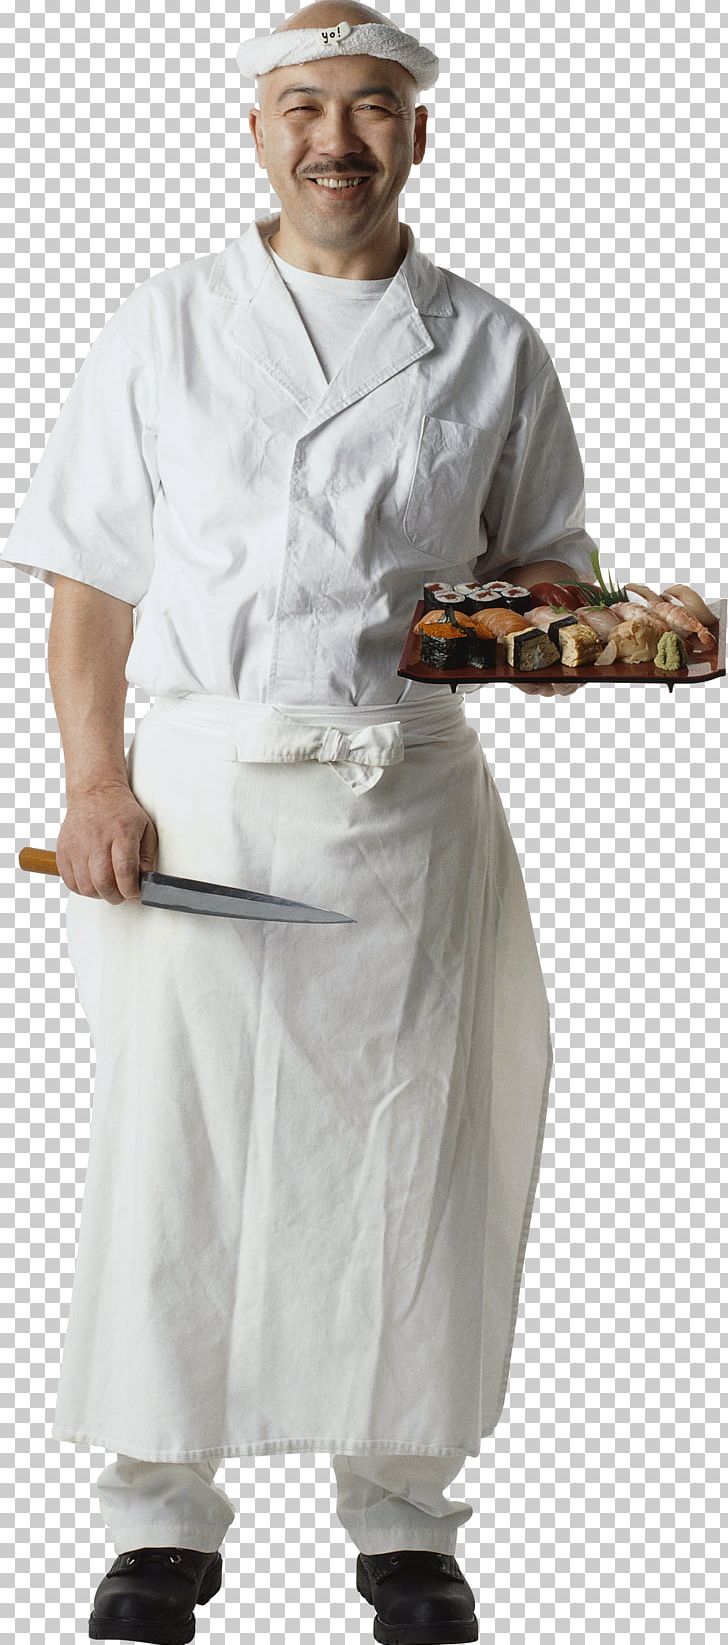 Sushi Chef Cook Food Molecular Gastronomy PNG, Clipart, Bakery, Chef, Chefs Uniform, Cook, Cooking Free PNG Download